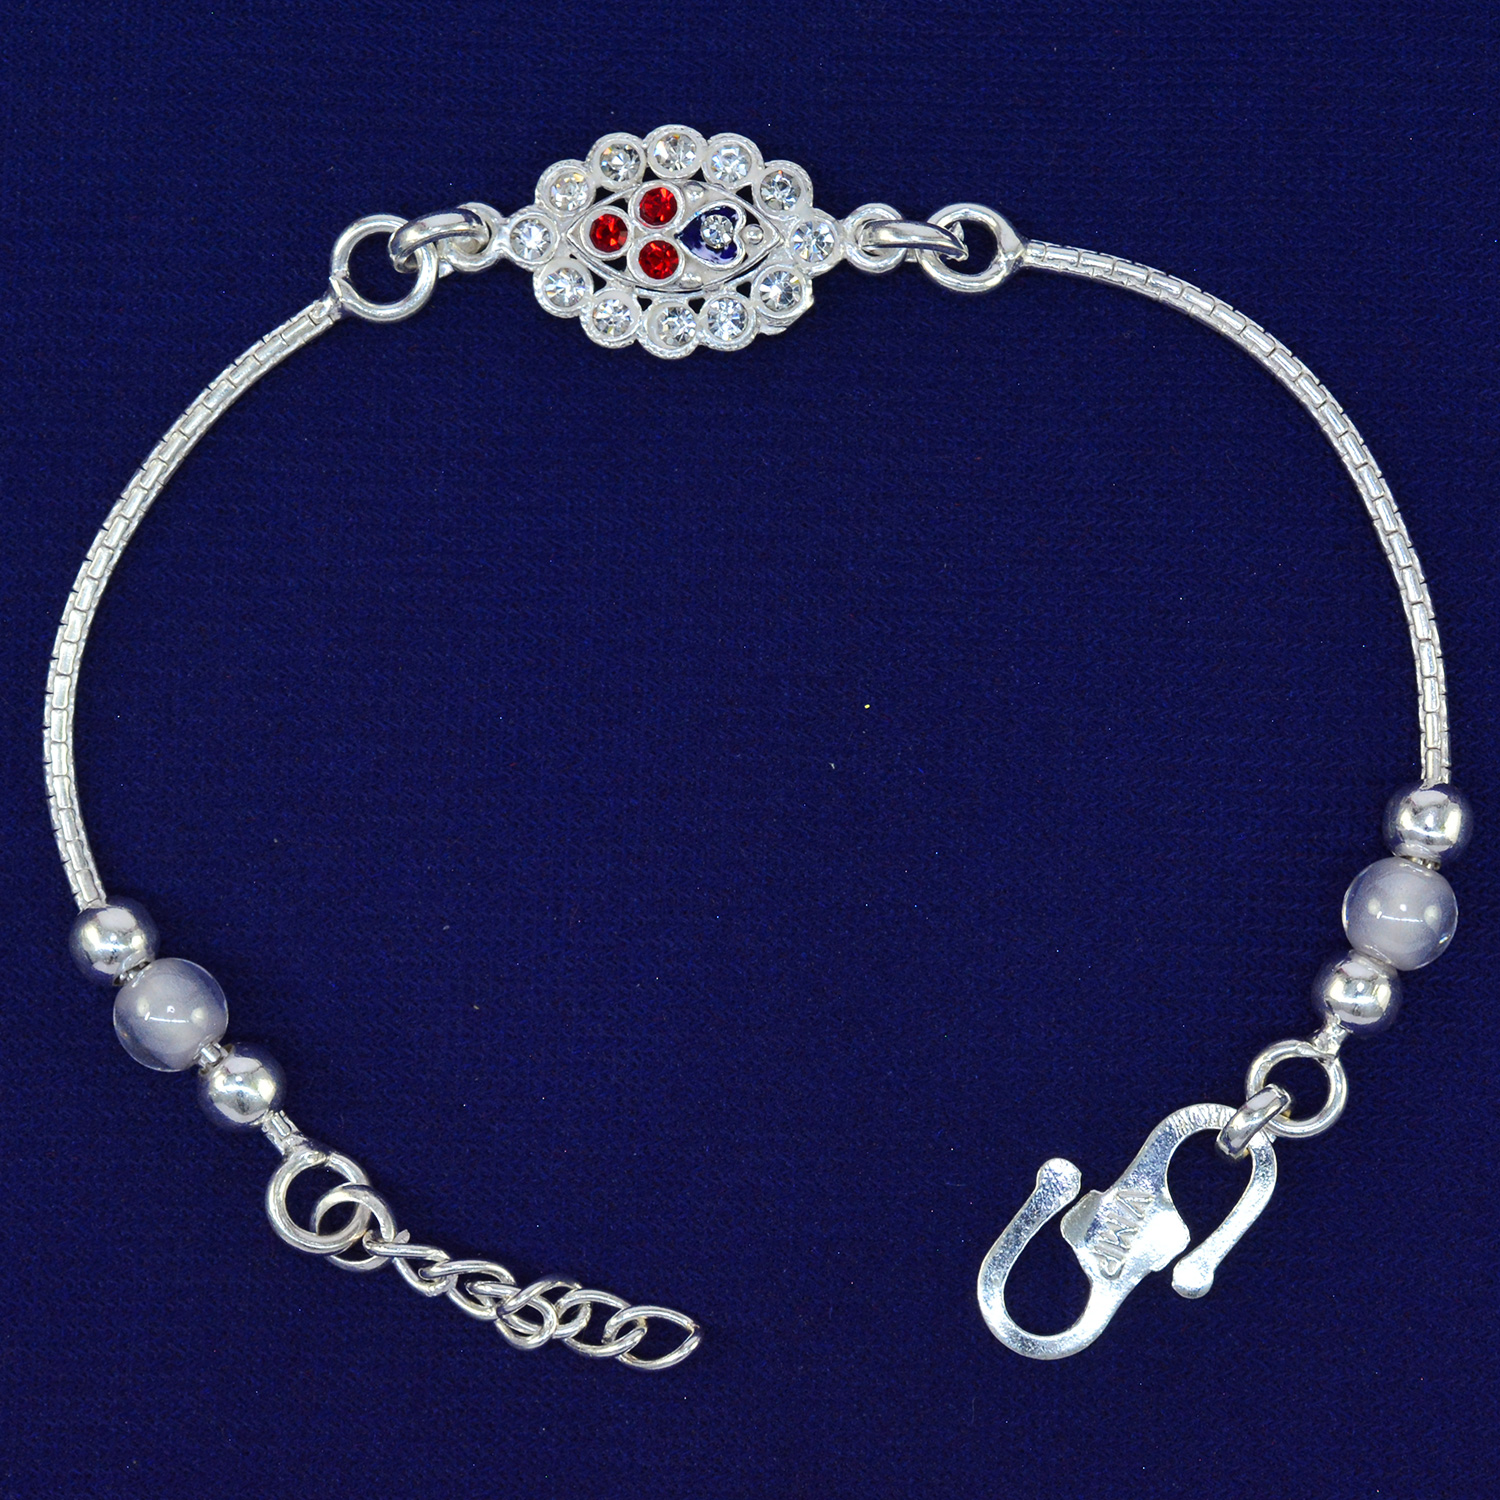 Red and Blue Beads Floral Design 70% Pure Silver Rakhi Design - 8.3 Grams